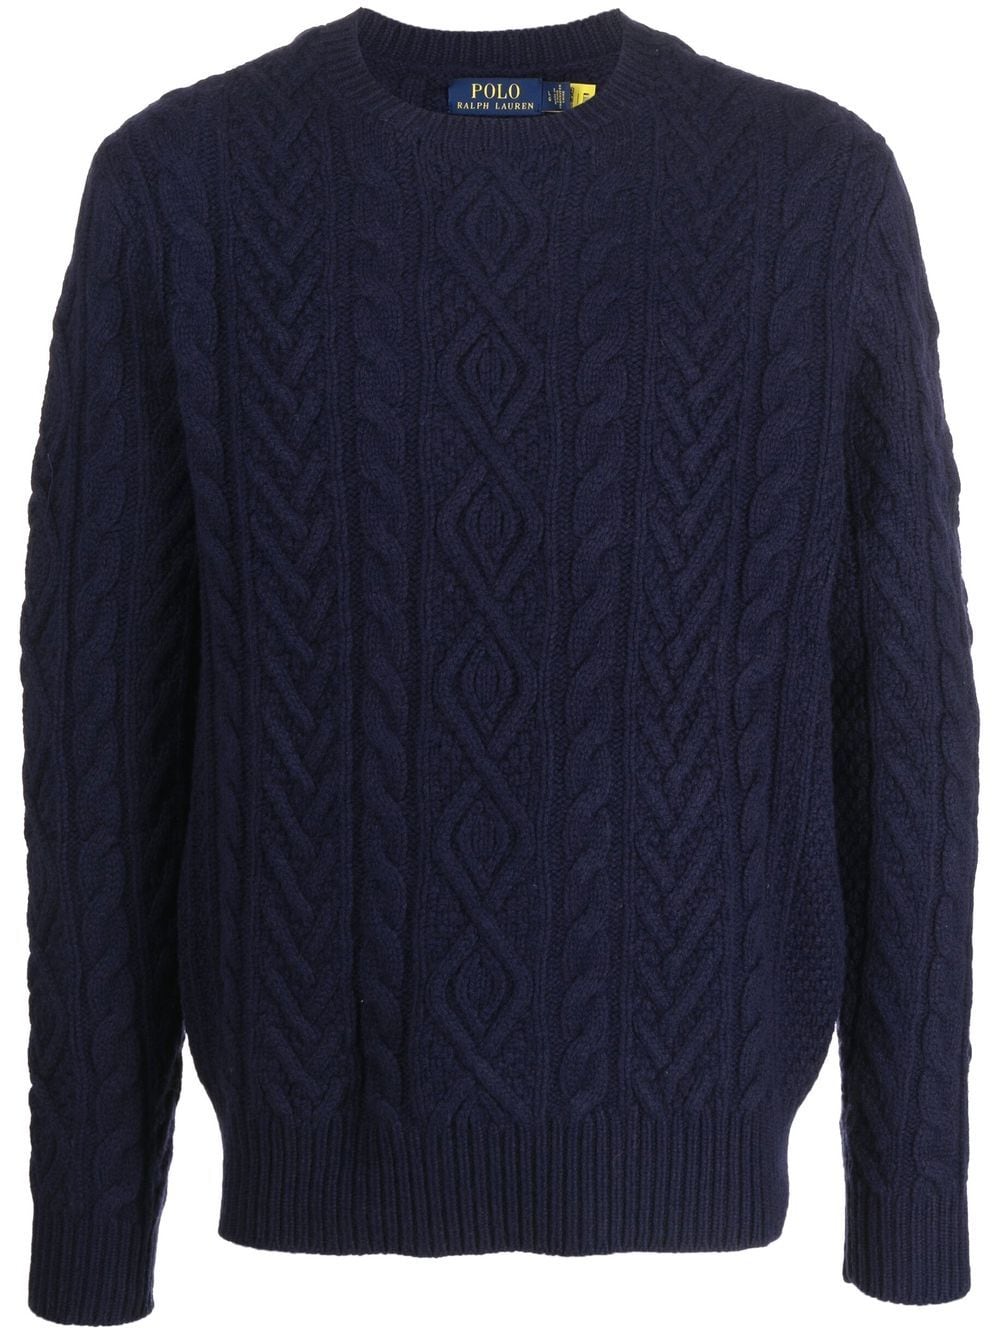 Image 1 of Polo Ralph Lauren cable-knit long-sleeve jumper